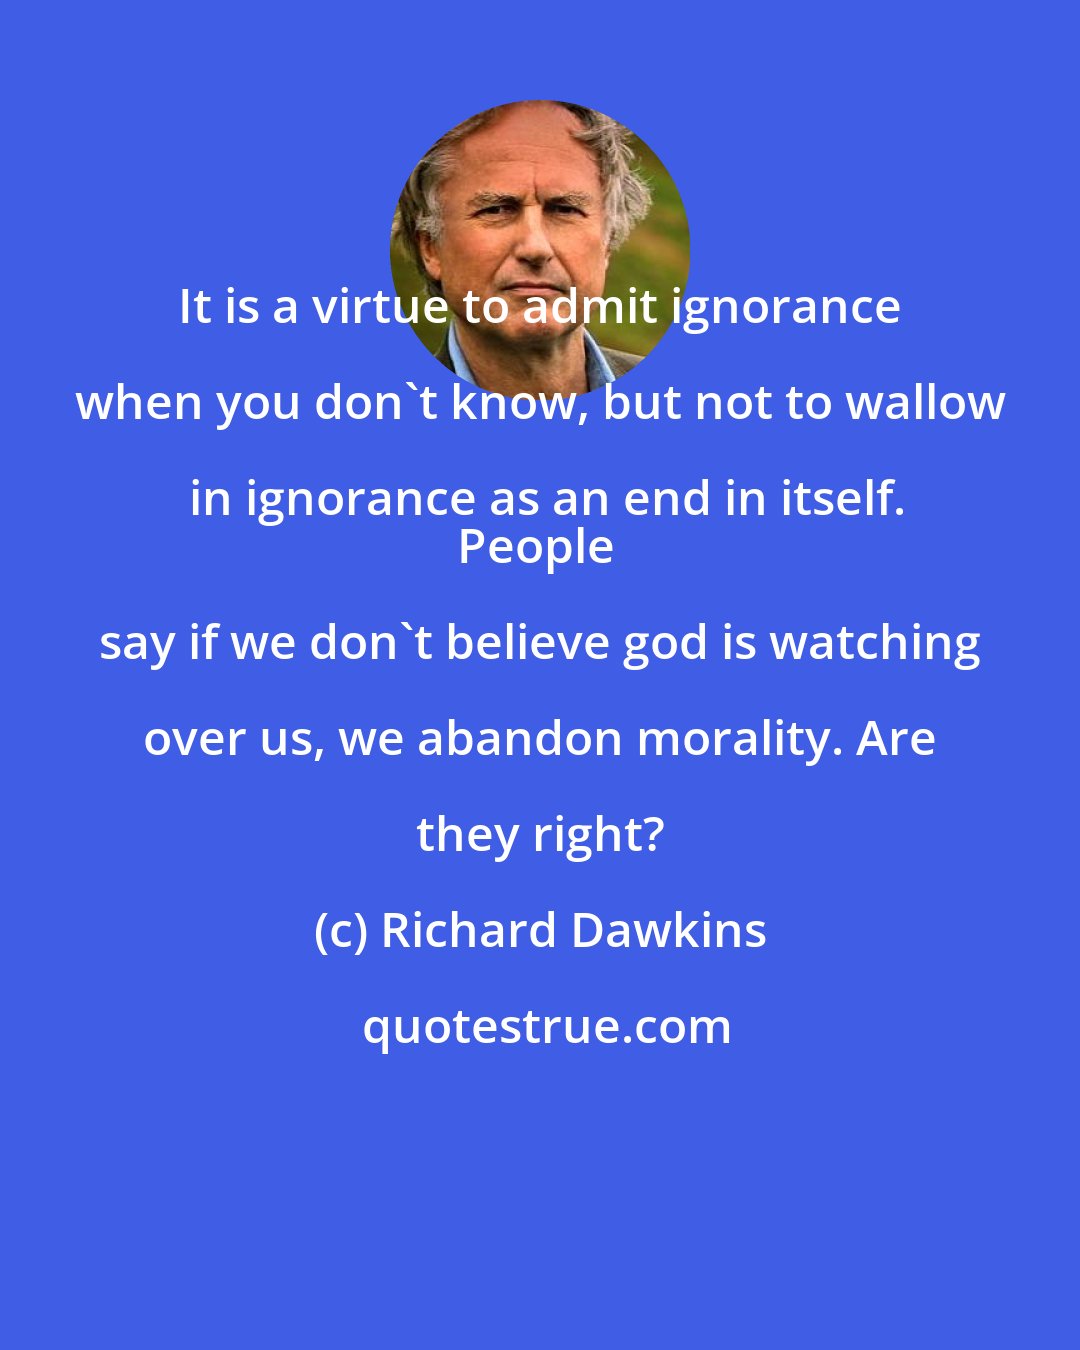 Richard Dawkins: It is a virtue to admit ignorance when you don't know, but not to wallow in ignorance as an end in itself.
People say if we don't believe god is watching over us, we abandon morality. Are they right?